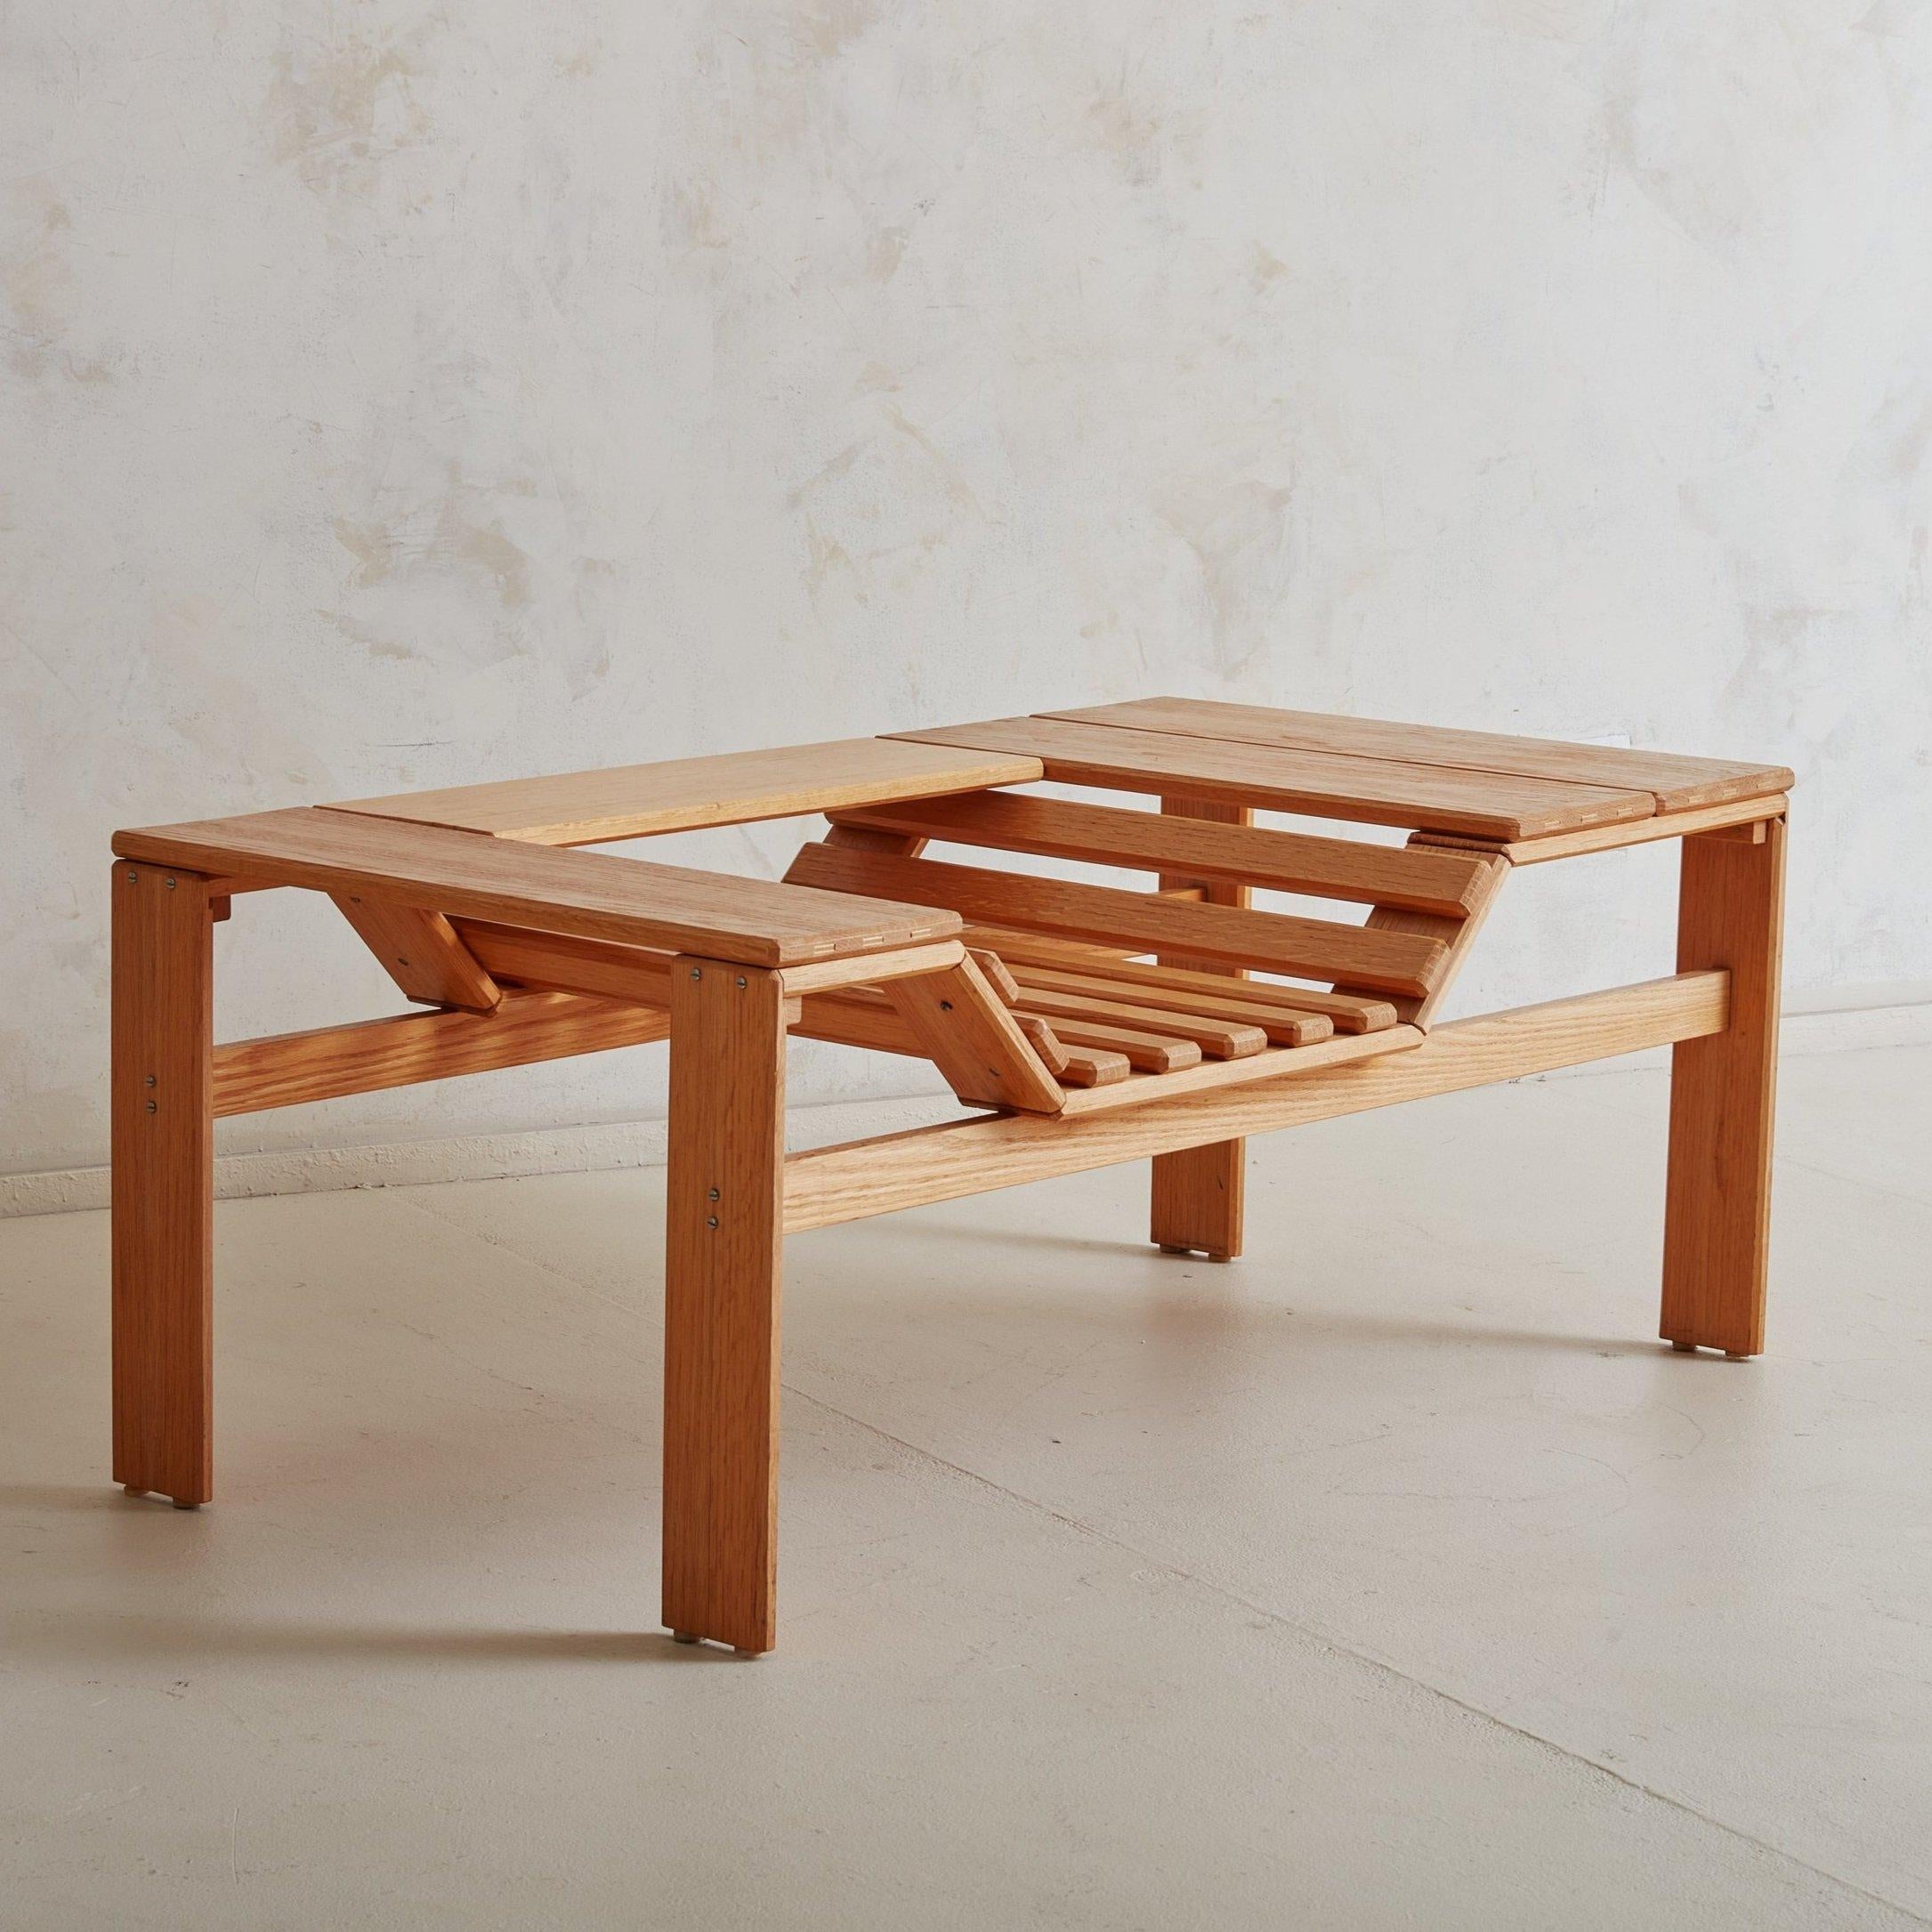 A Danish Modern wood bench or coffee table featuring clean lines and a natural blonde finish. This architectural form bench is exceptionally well made with four sturdy legs attached by exposed metal hardware. The slatted inset seat doubles as a